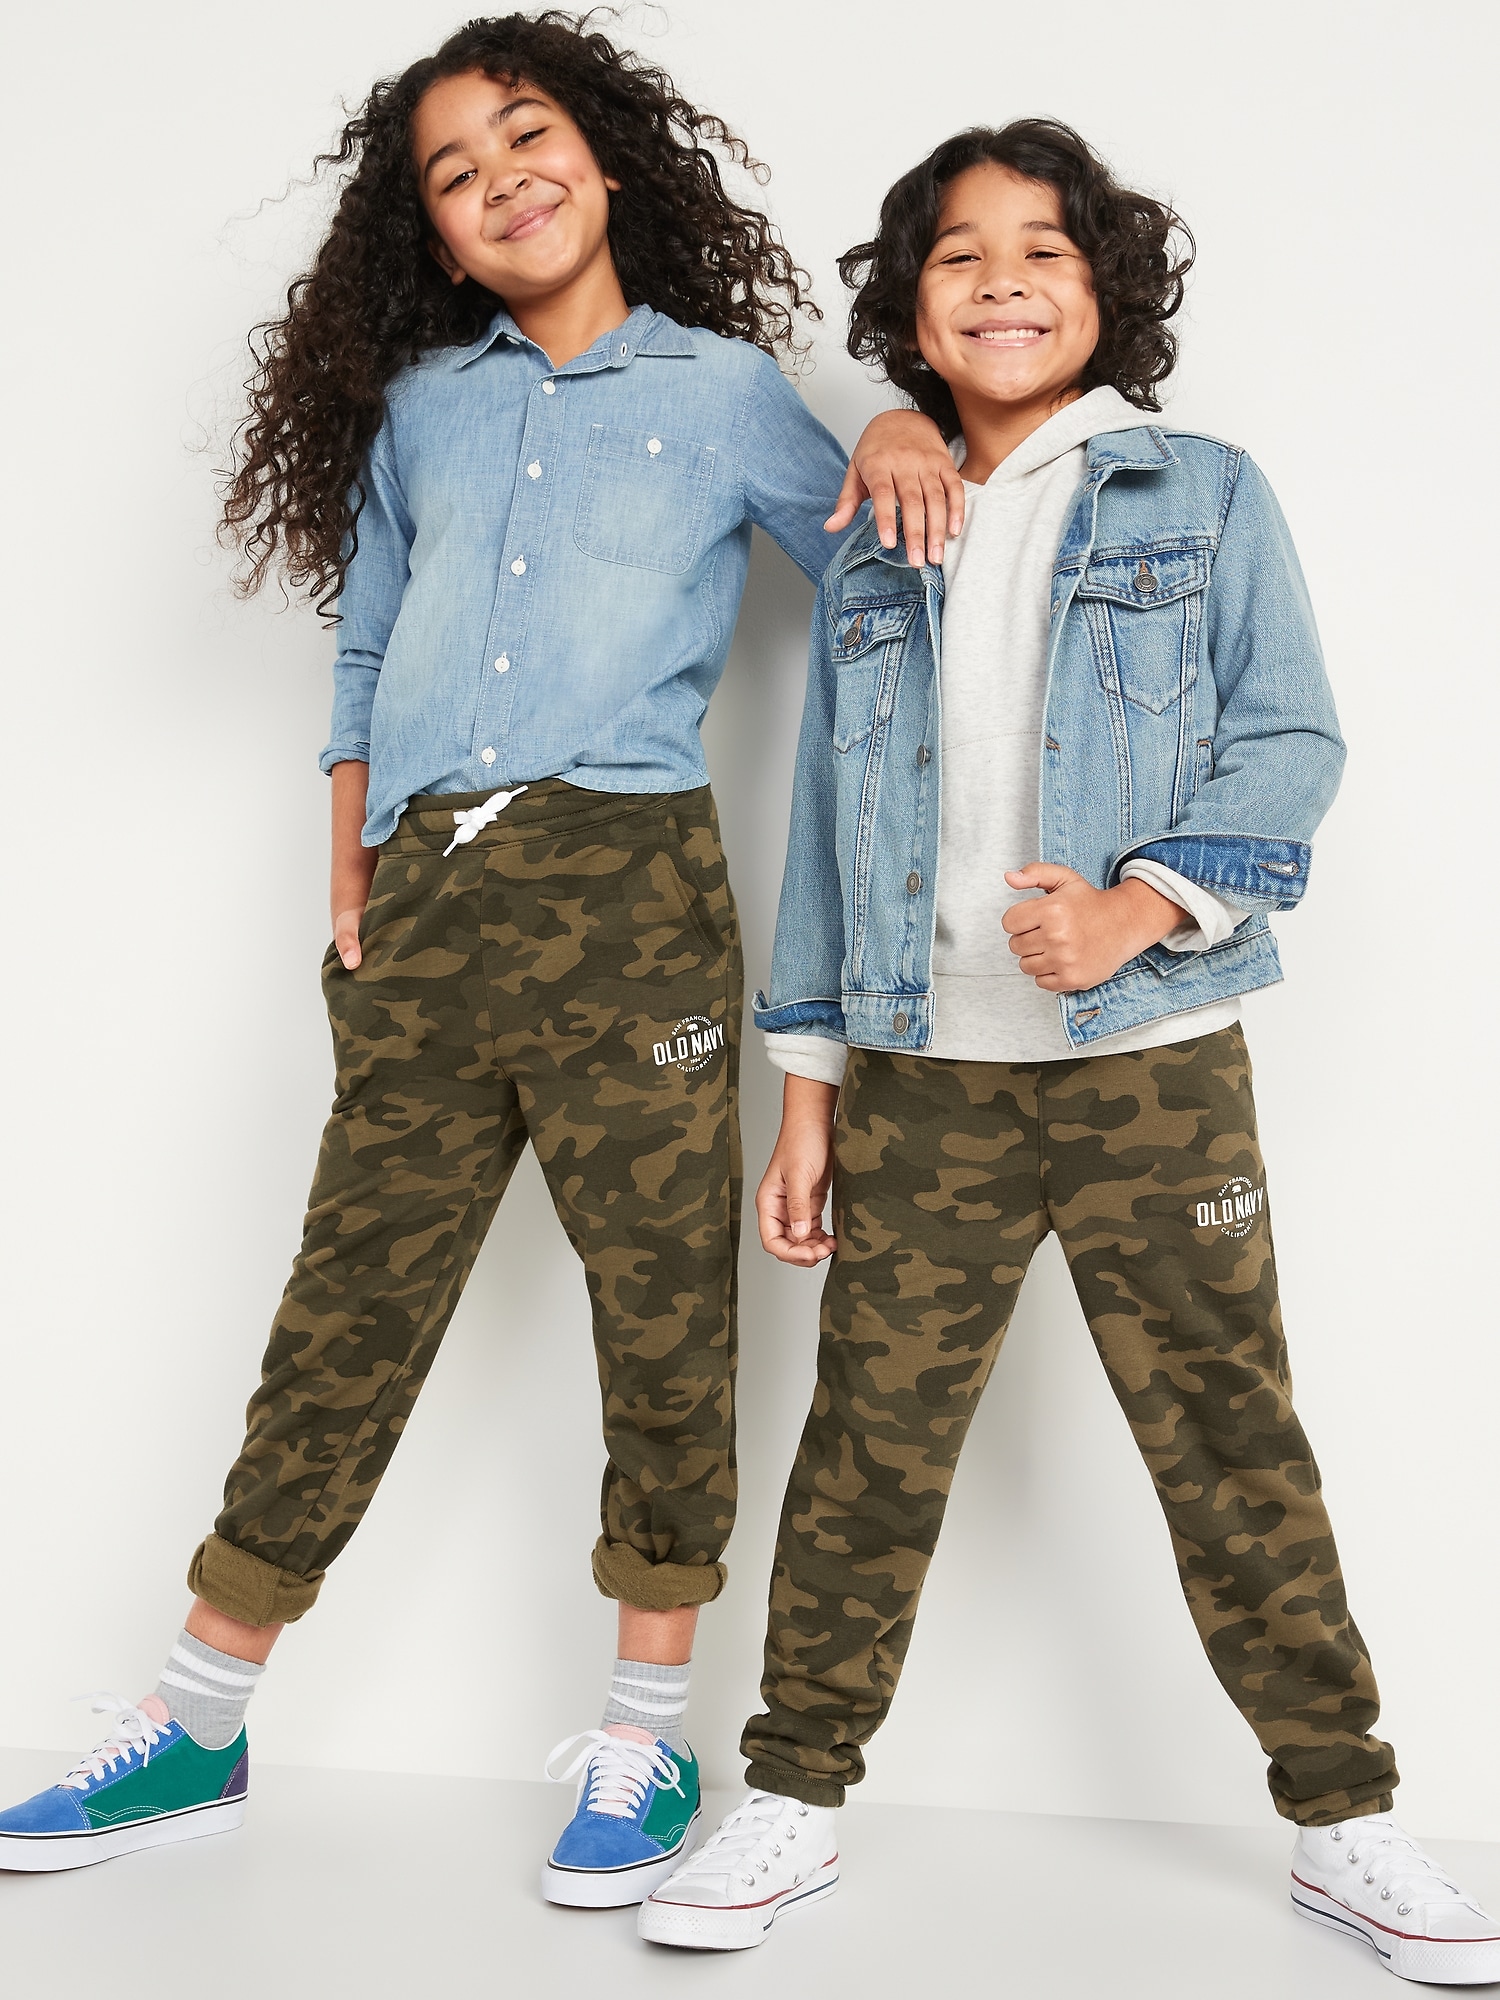 Old Navy Activewear: Why I Shop The Children's Section •